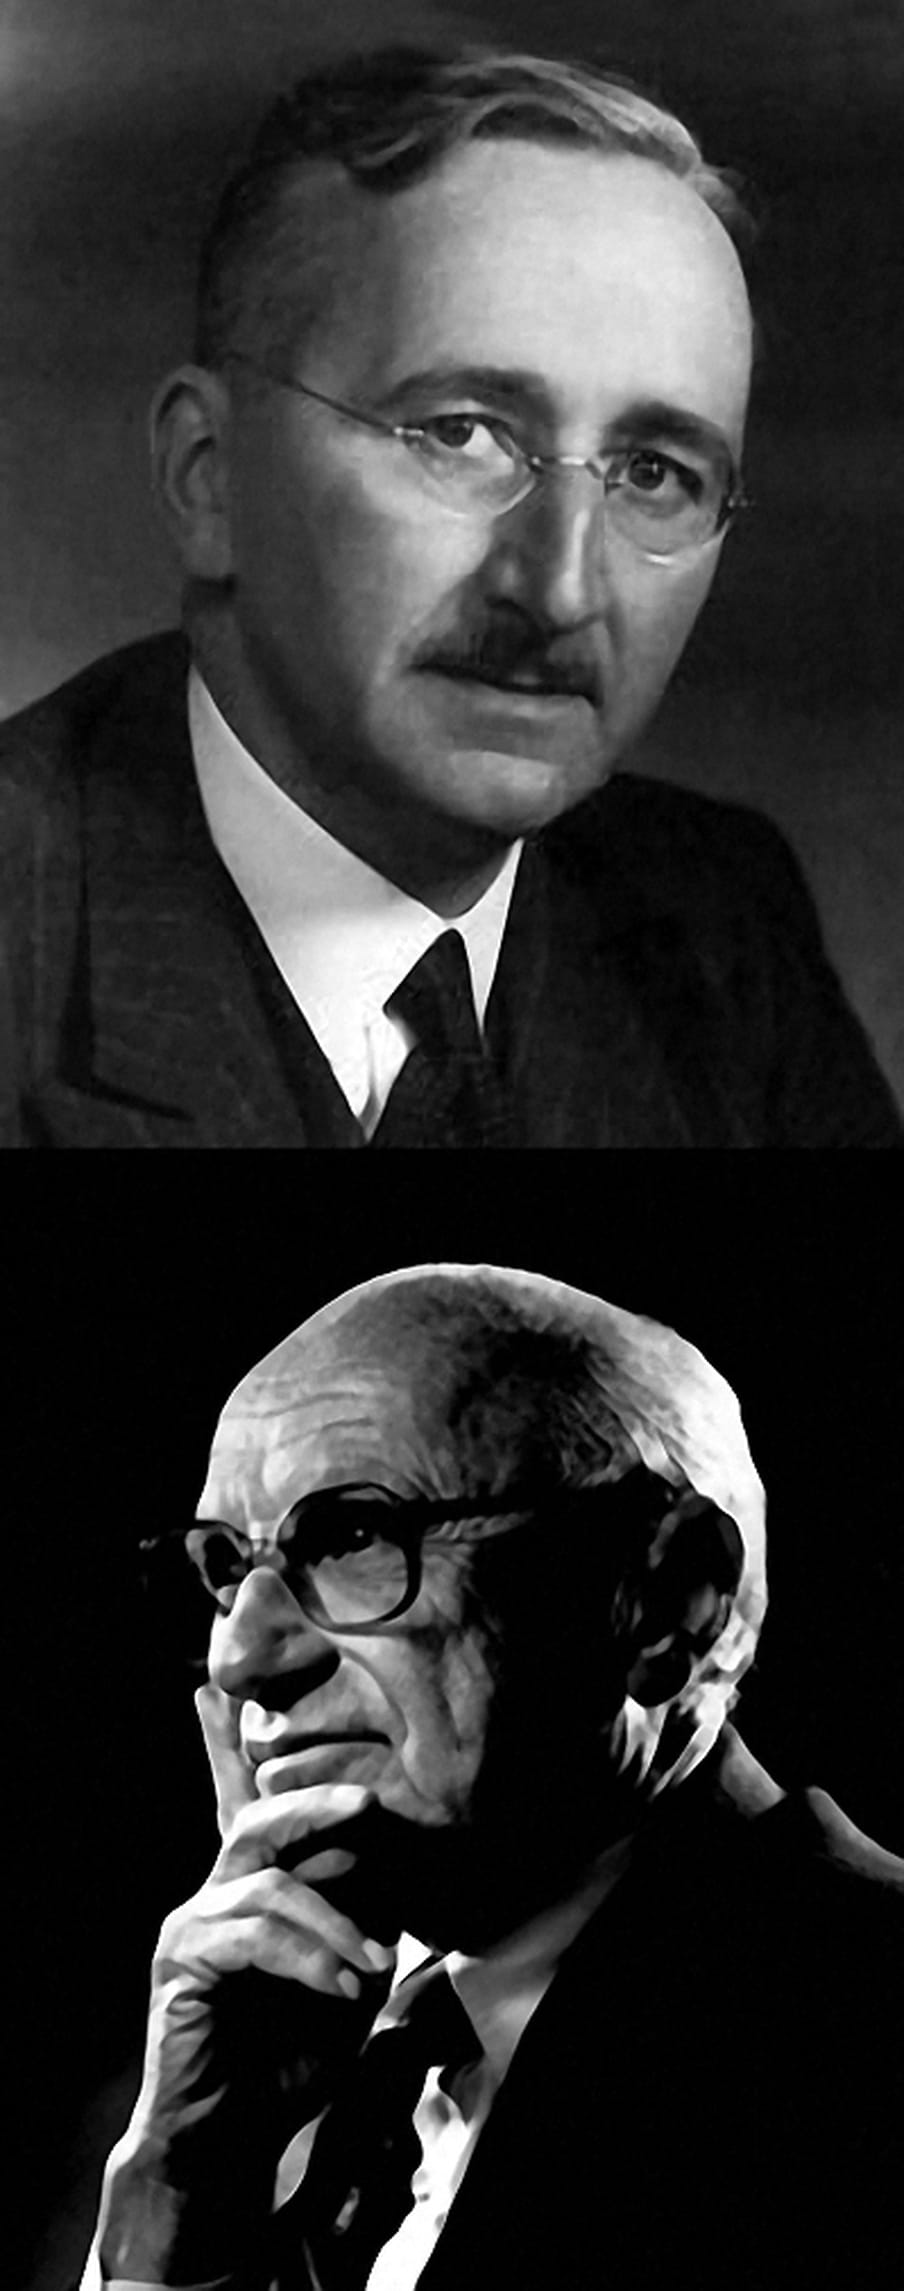 Portraits of two men, both wearing glasses. One is bold, one has a mustache.